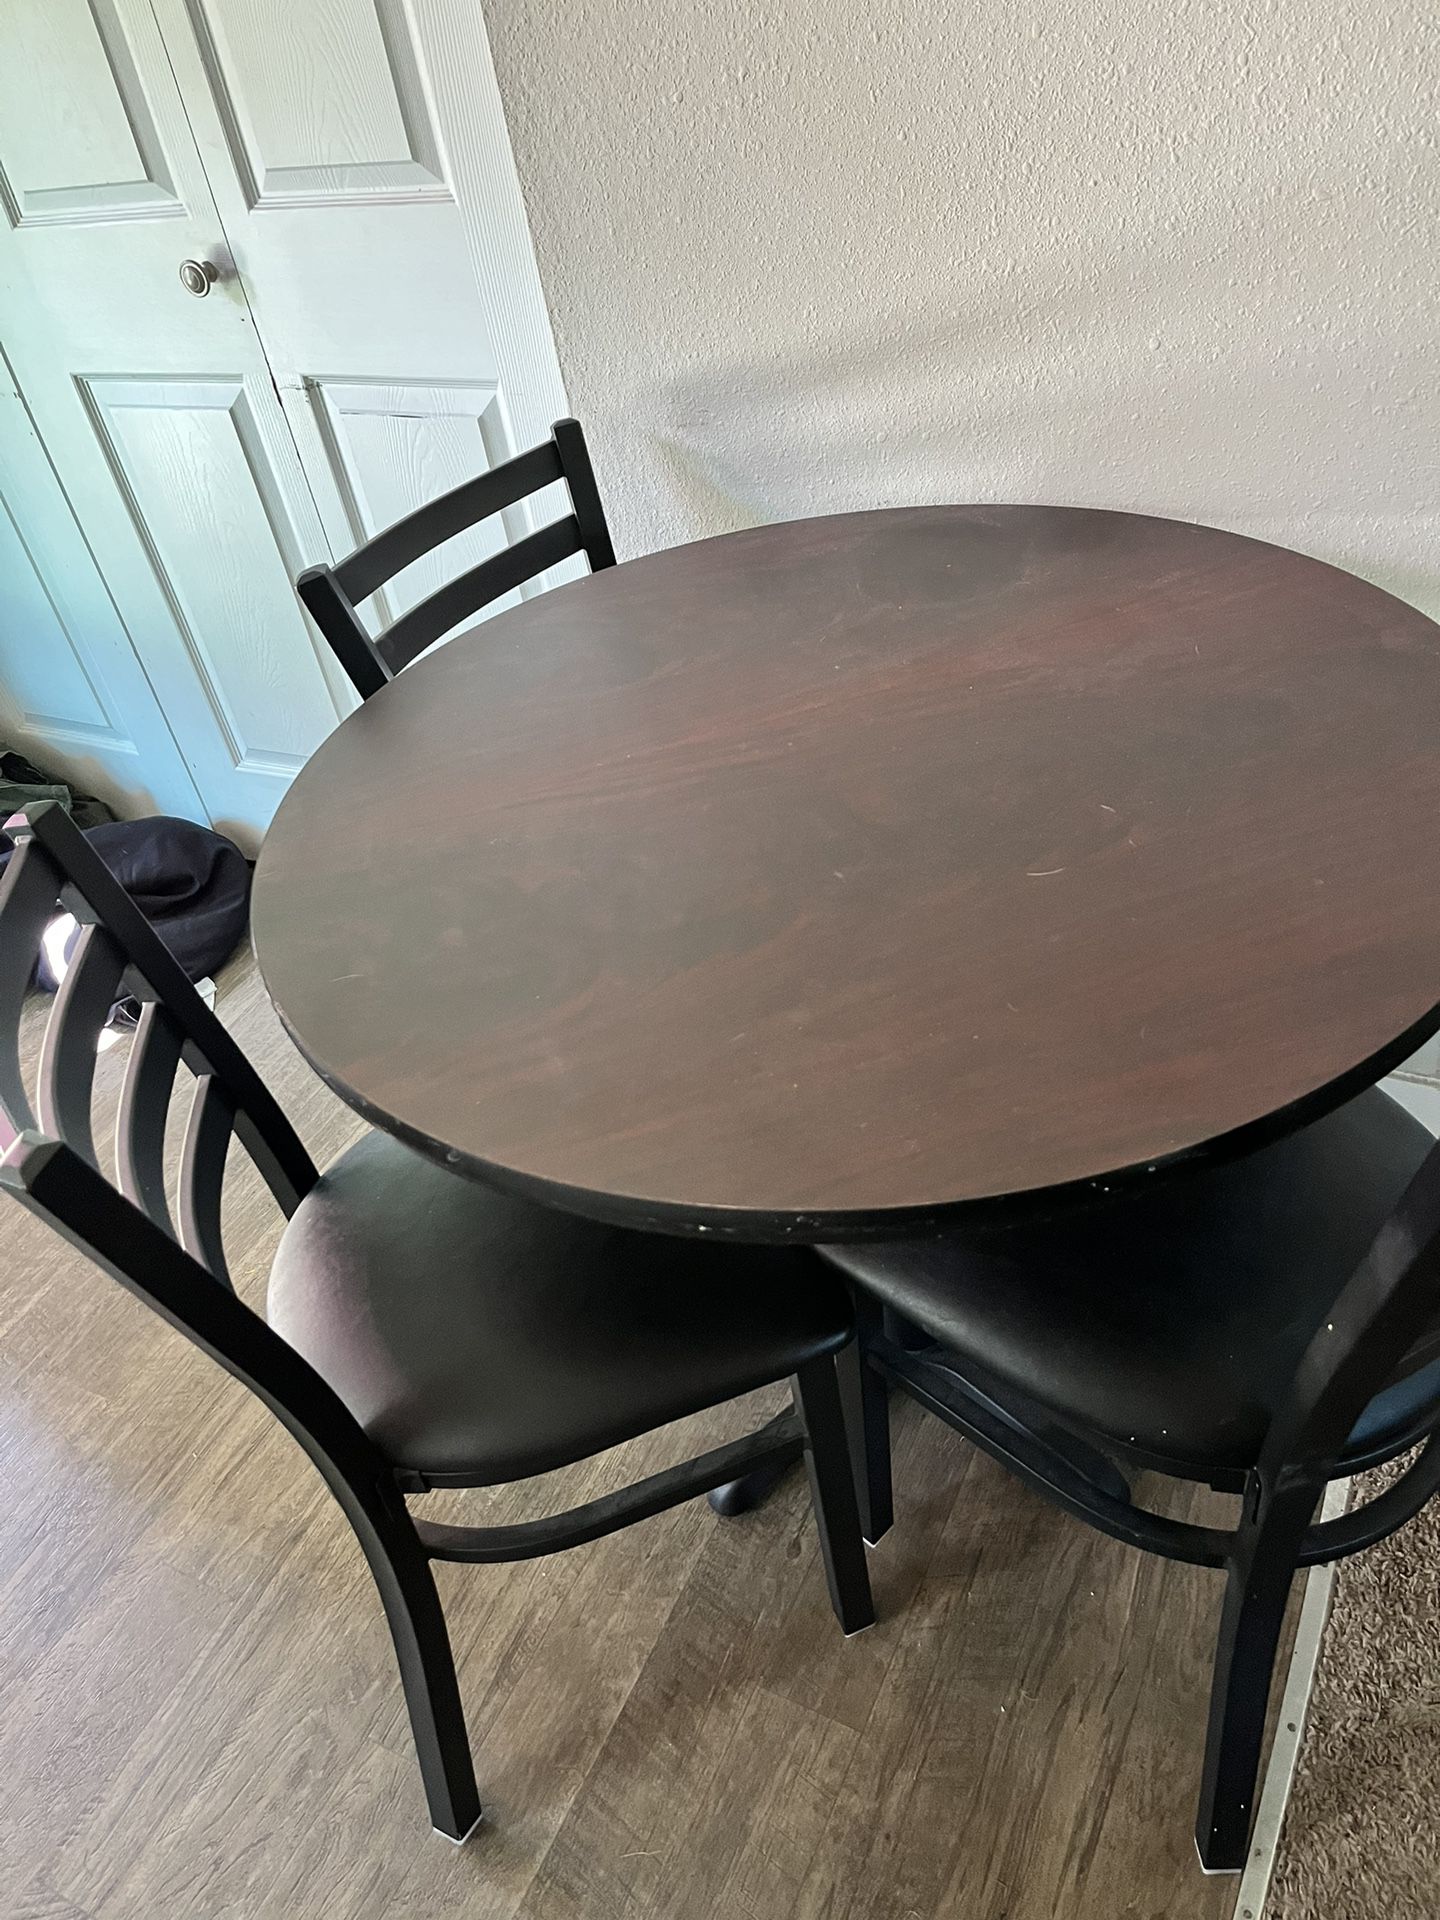 3ft Table And 4 Chairs